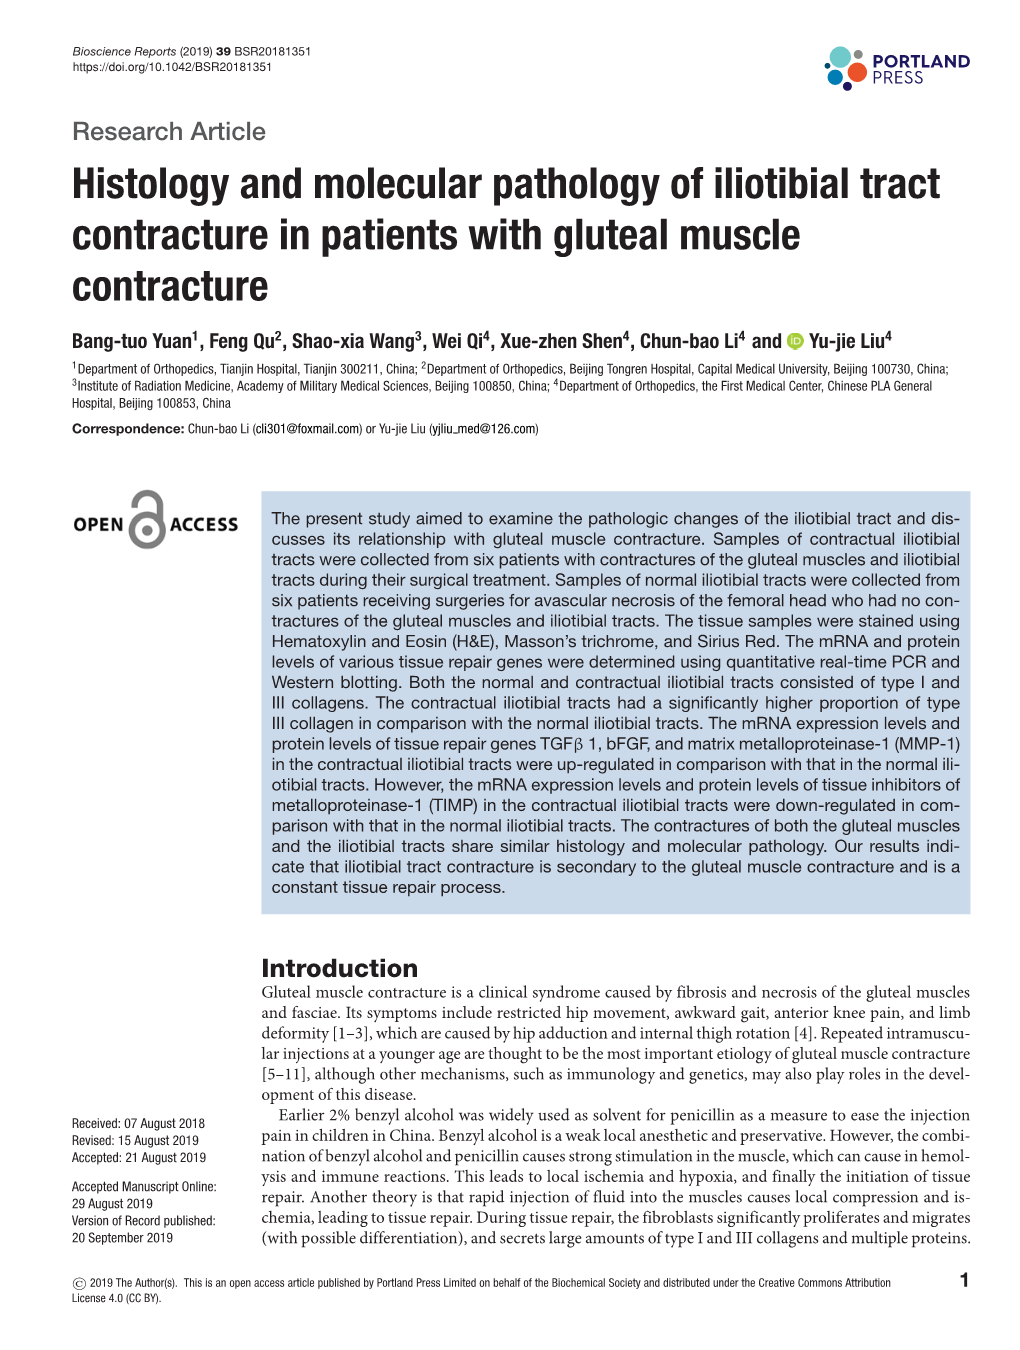 Histology and Molecular Pathology of Iliotibial Tract Contracture in Patients with Gluteal Muscle Contracture